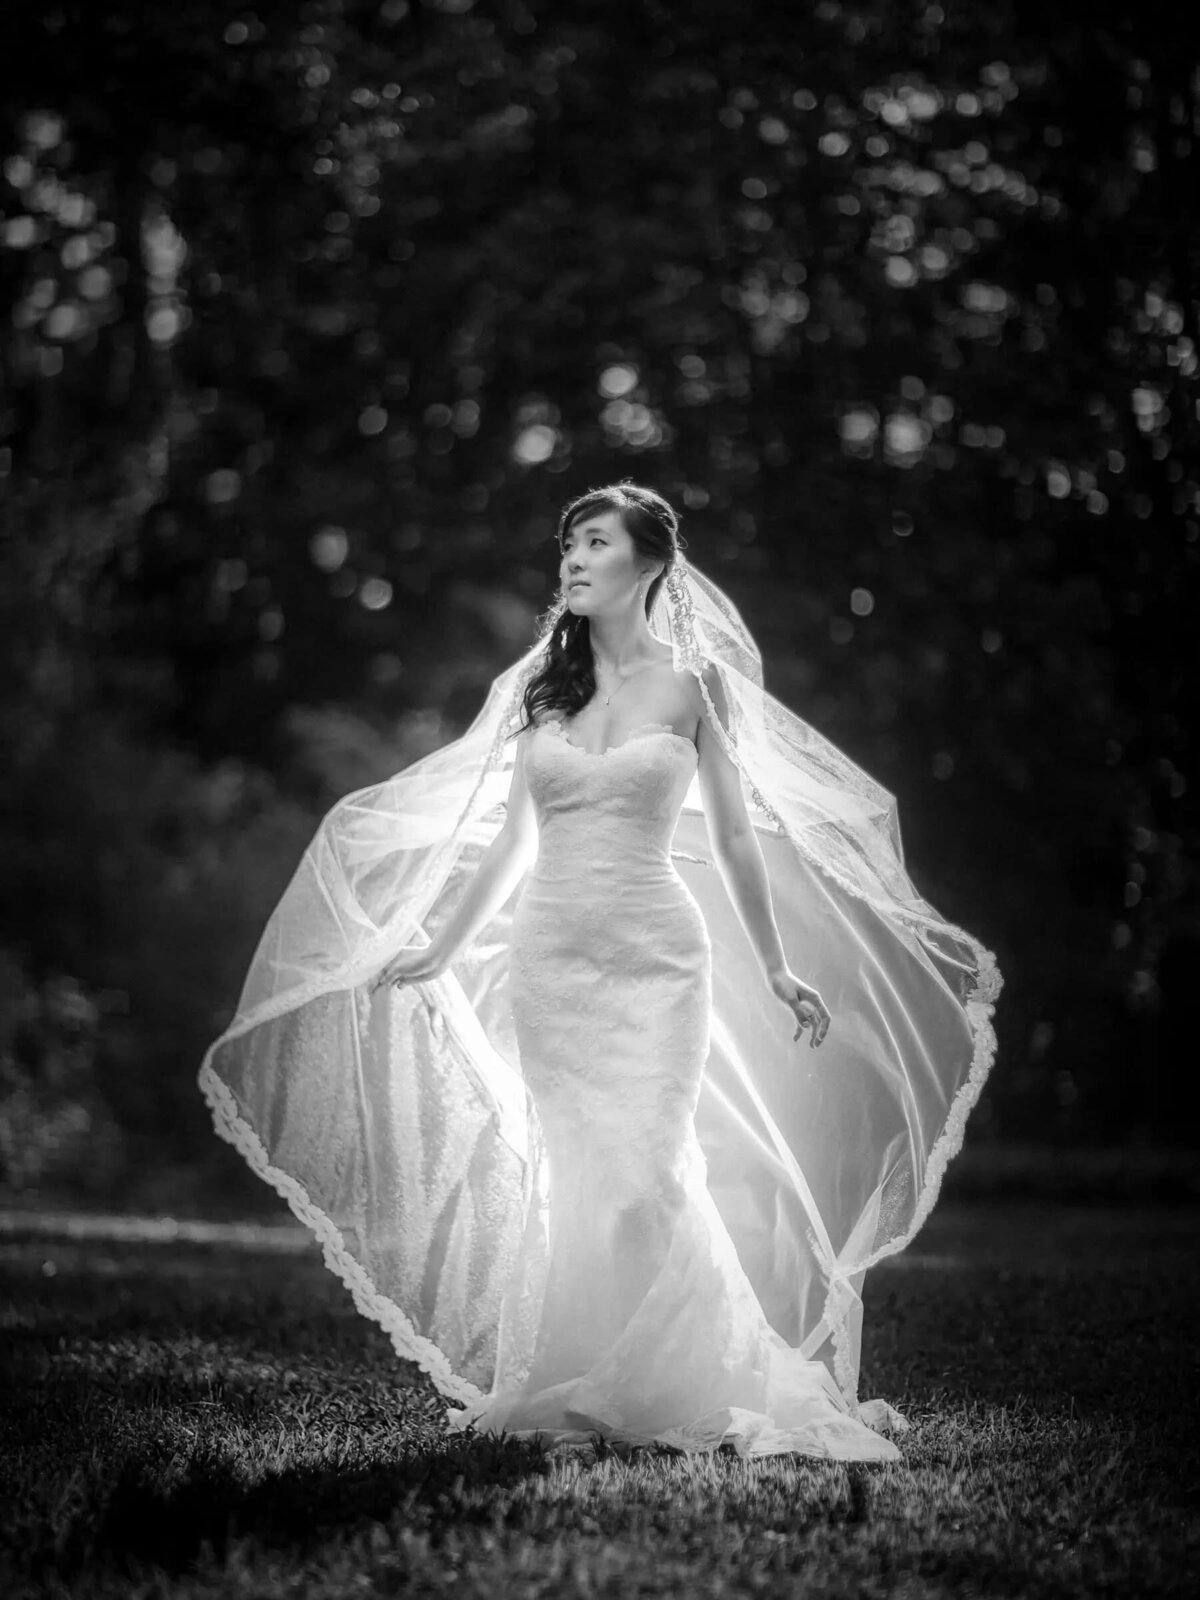 A bride walking on a lawn with her veil flowing